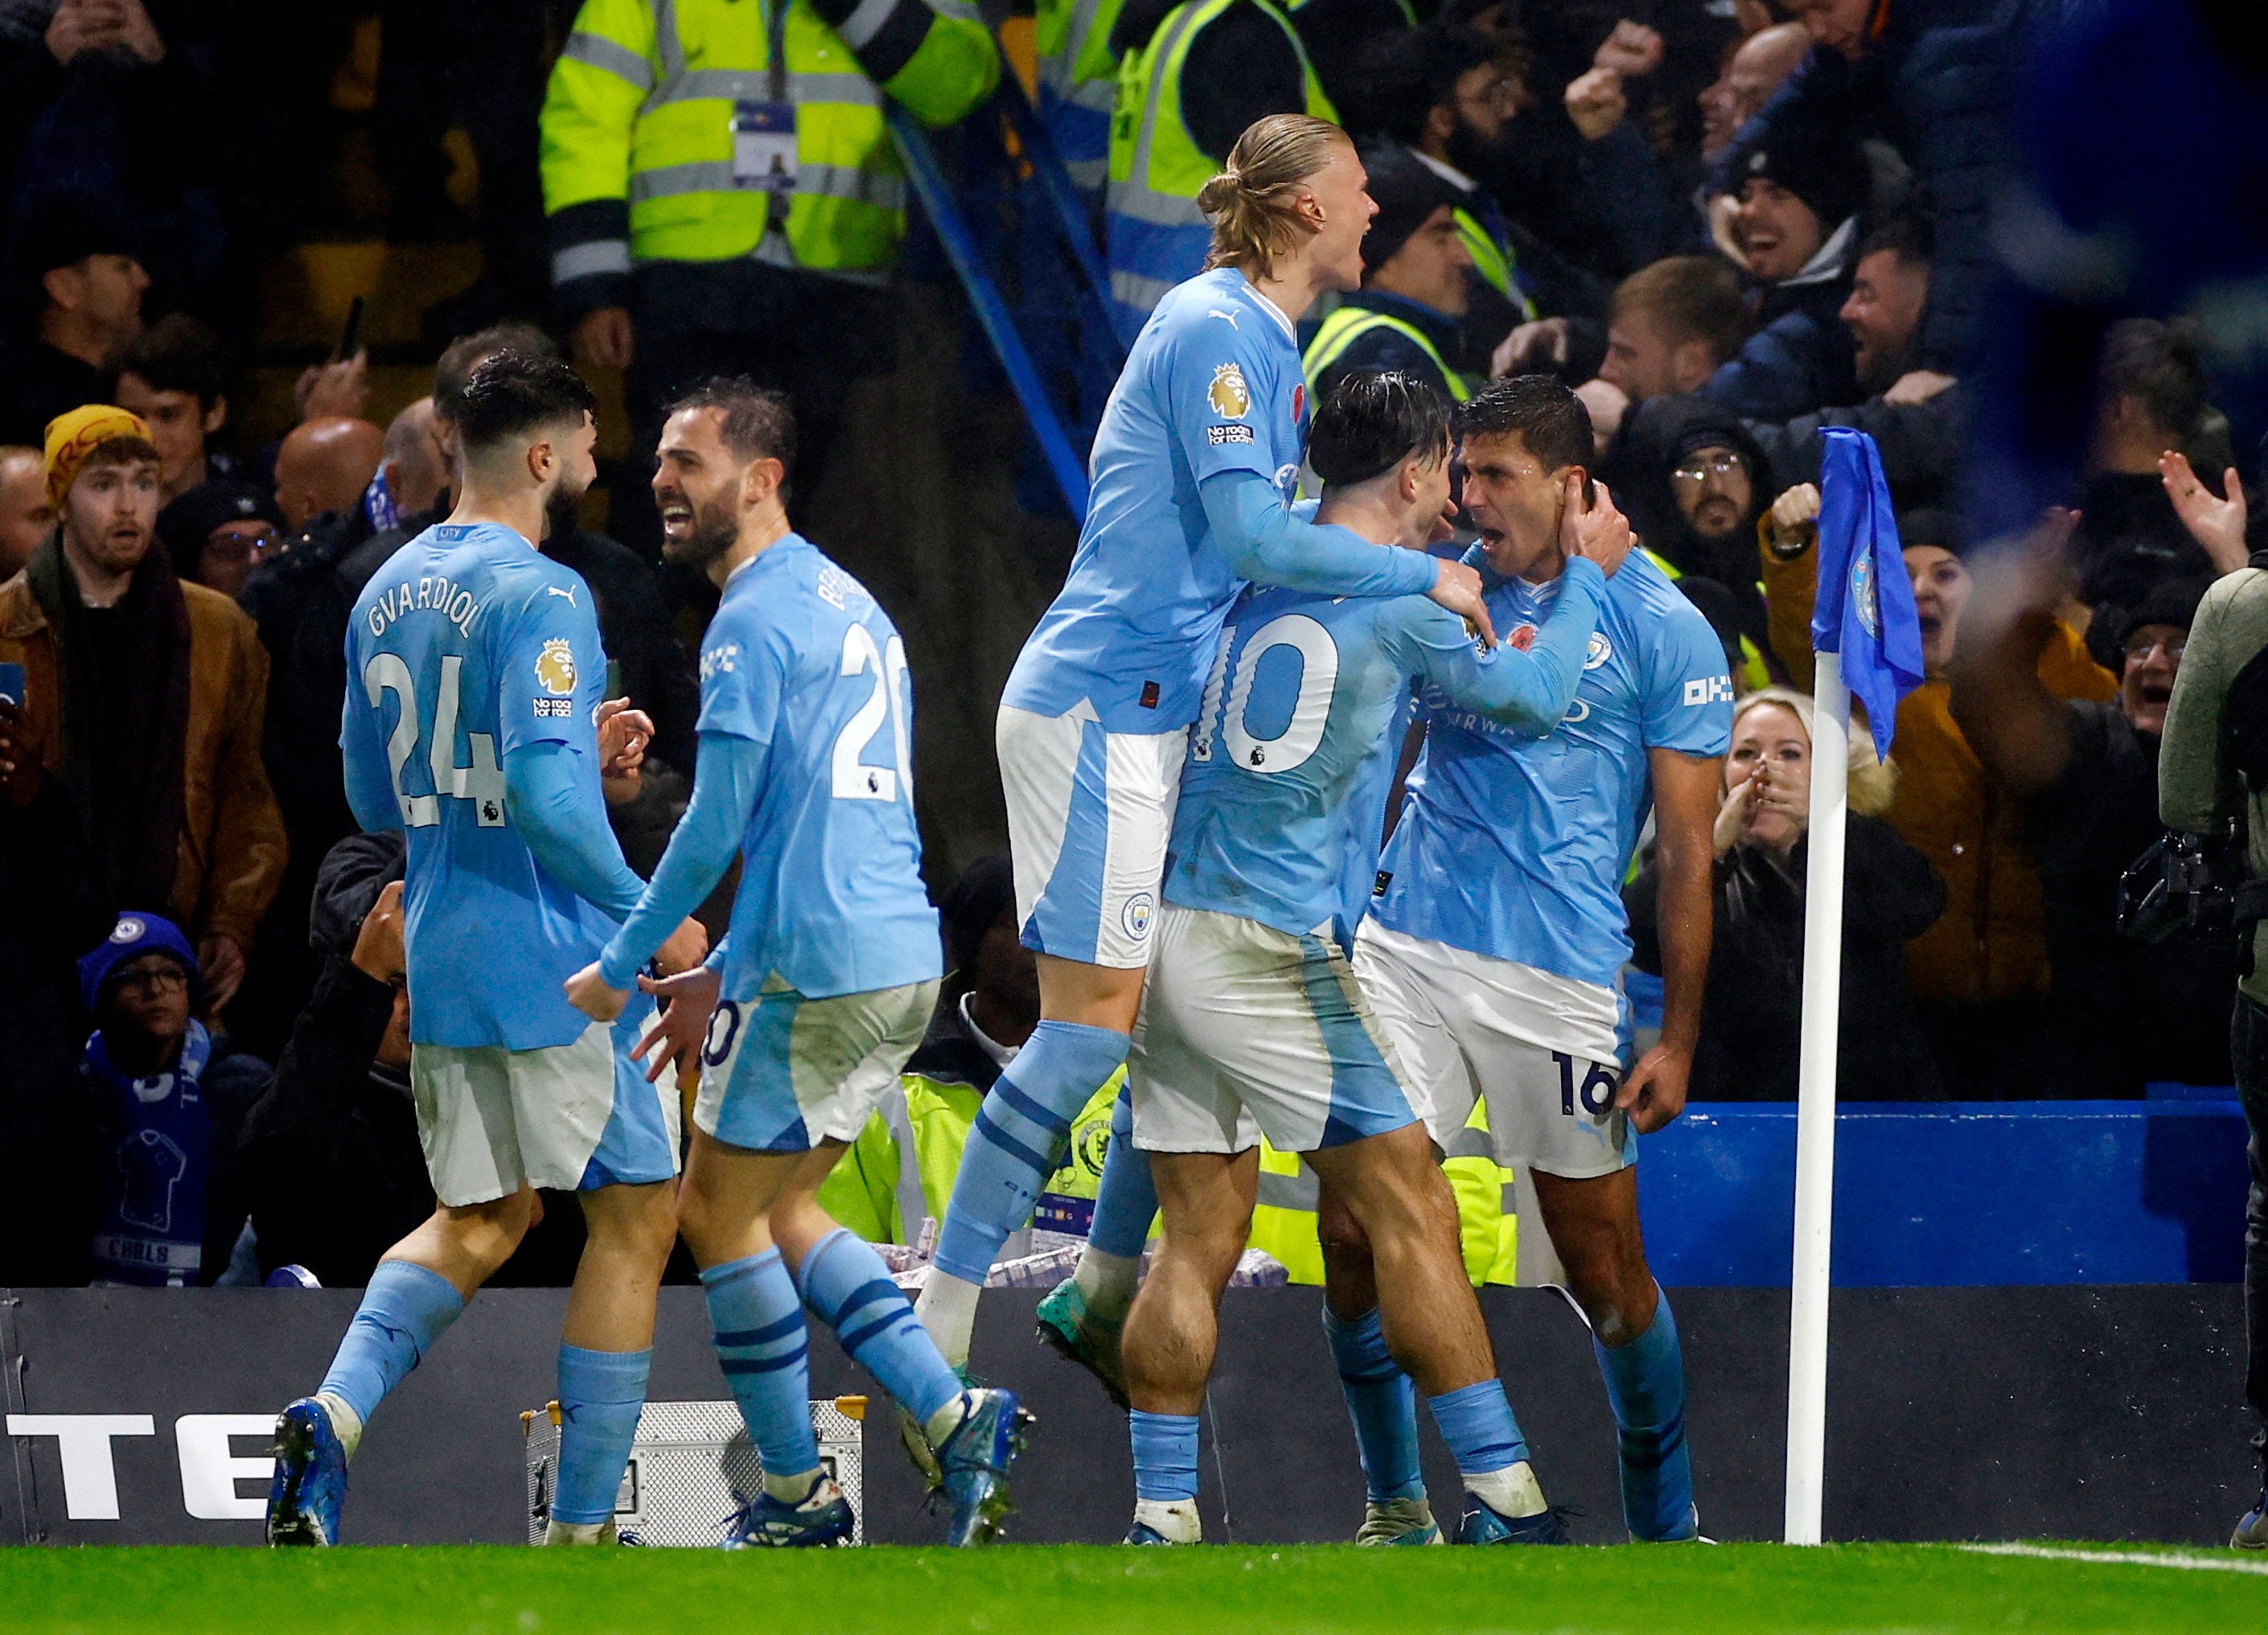 Manchester City came away with only a point from an eight-goal thriller against Chelsea